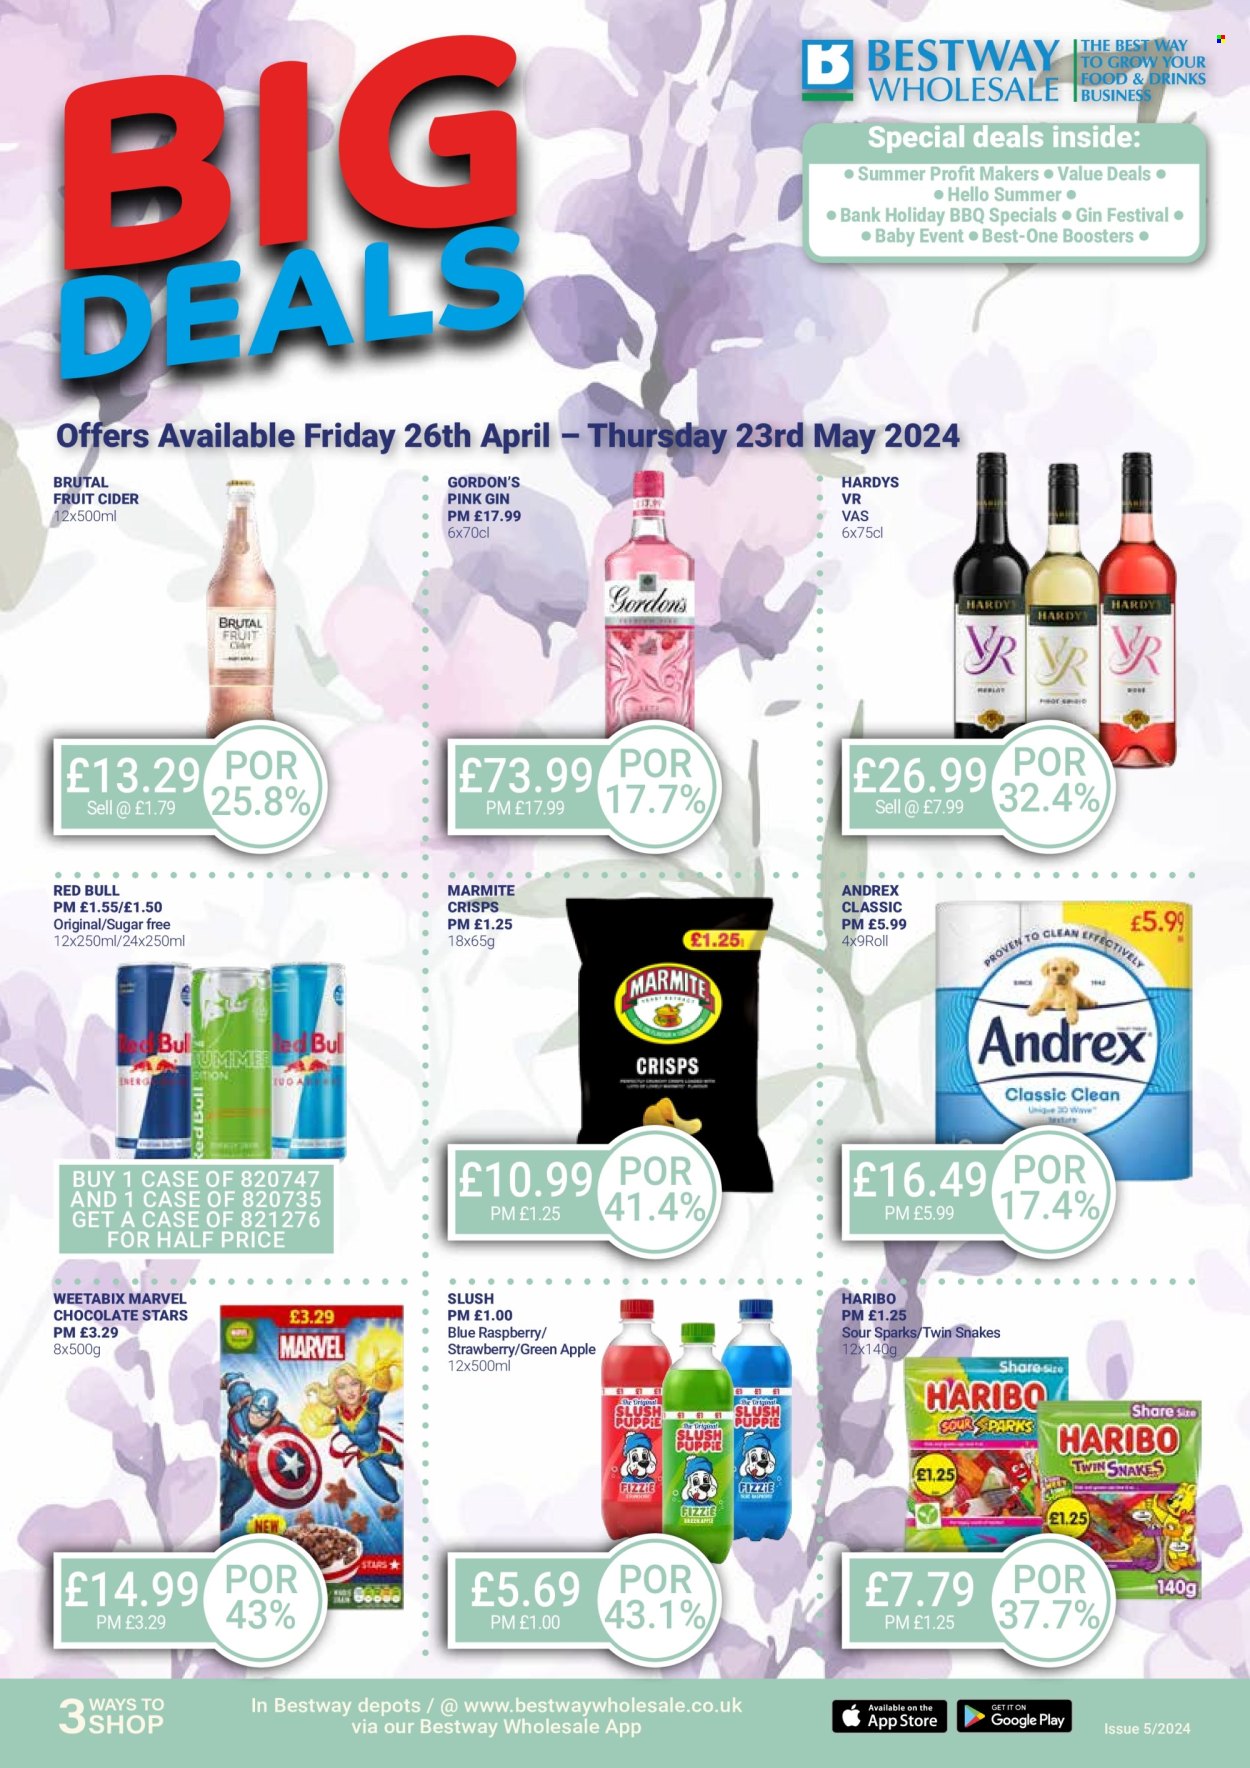 thumbnail - Bestway offer  - 26/04/2024 - 23/05/2024 - Sales products - alcohol, cookies, Haribo, crisps, Weetabix, yeast extract, Marmite, energy drink, Red Bull, gin, Gordon's, cider, Marvel. Page 1.